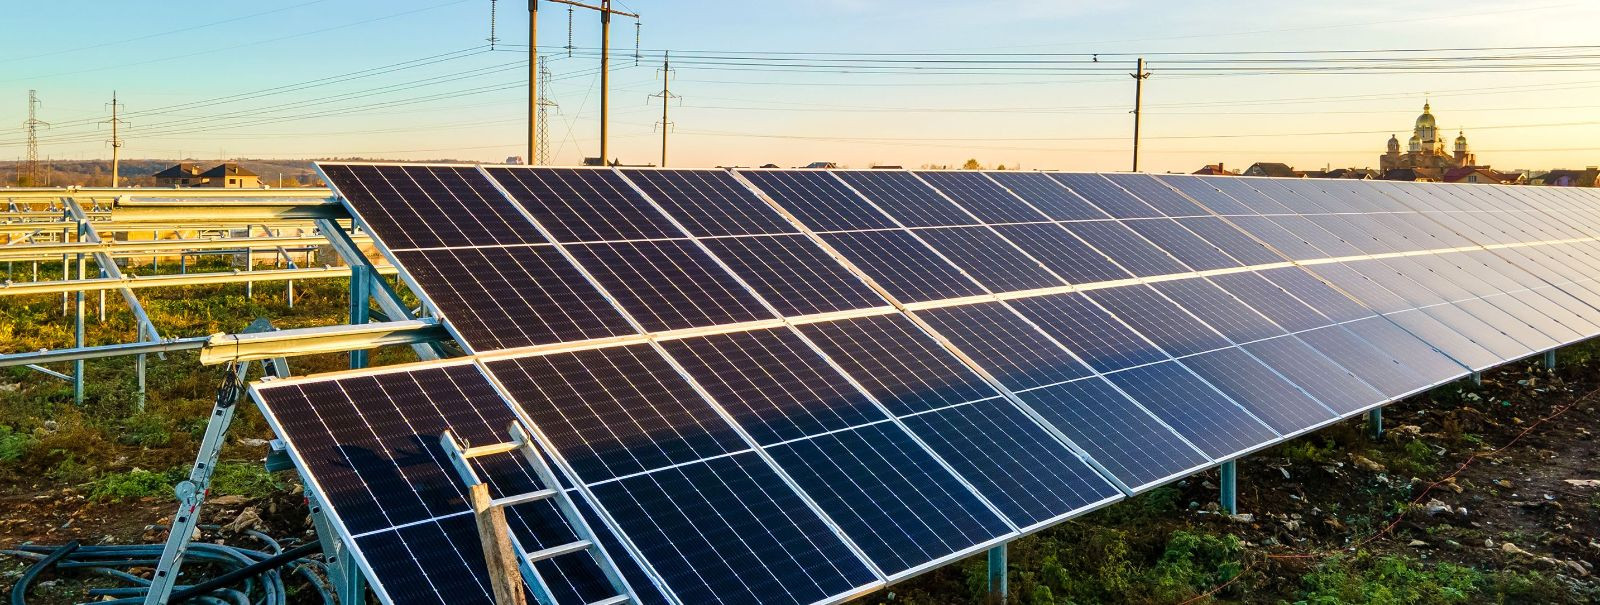 At Solider Solutions OÜ, we believe in a future where energy is harnessed sustainably, efficiently, and affordably. For over 18 years, we have been at the foref